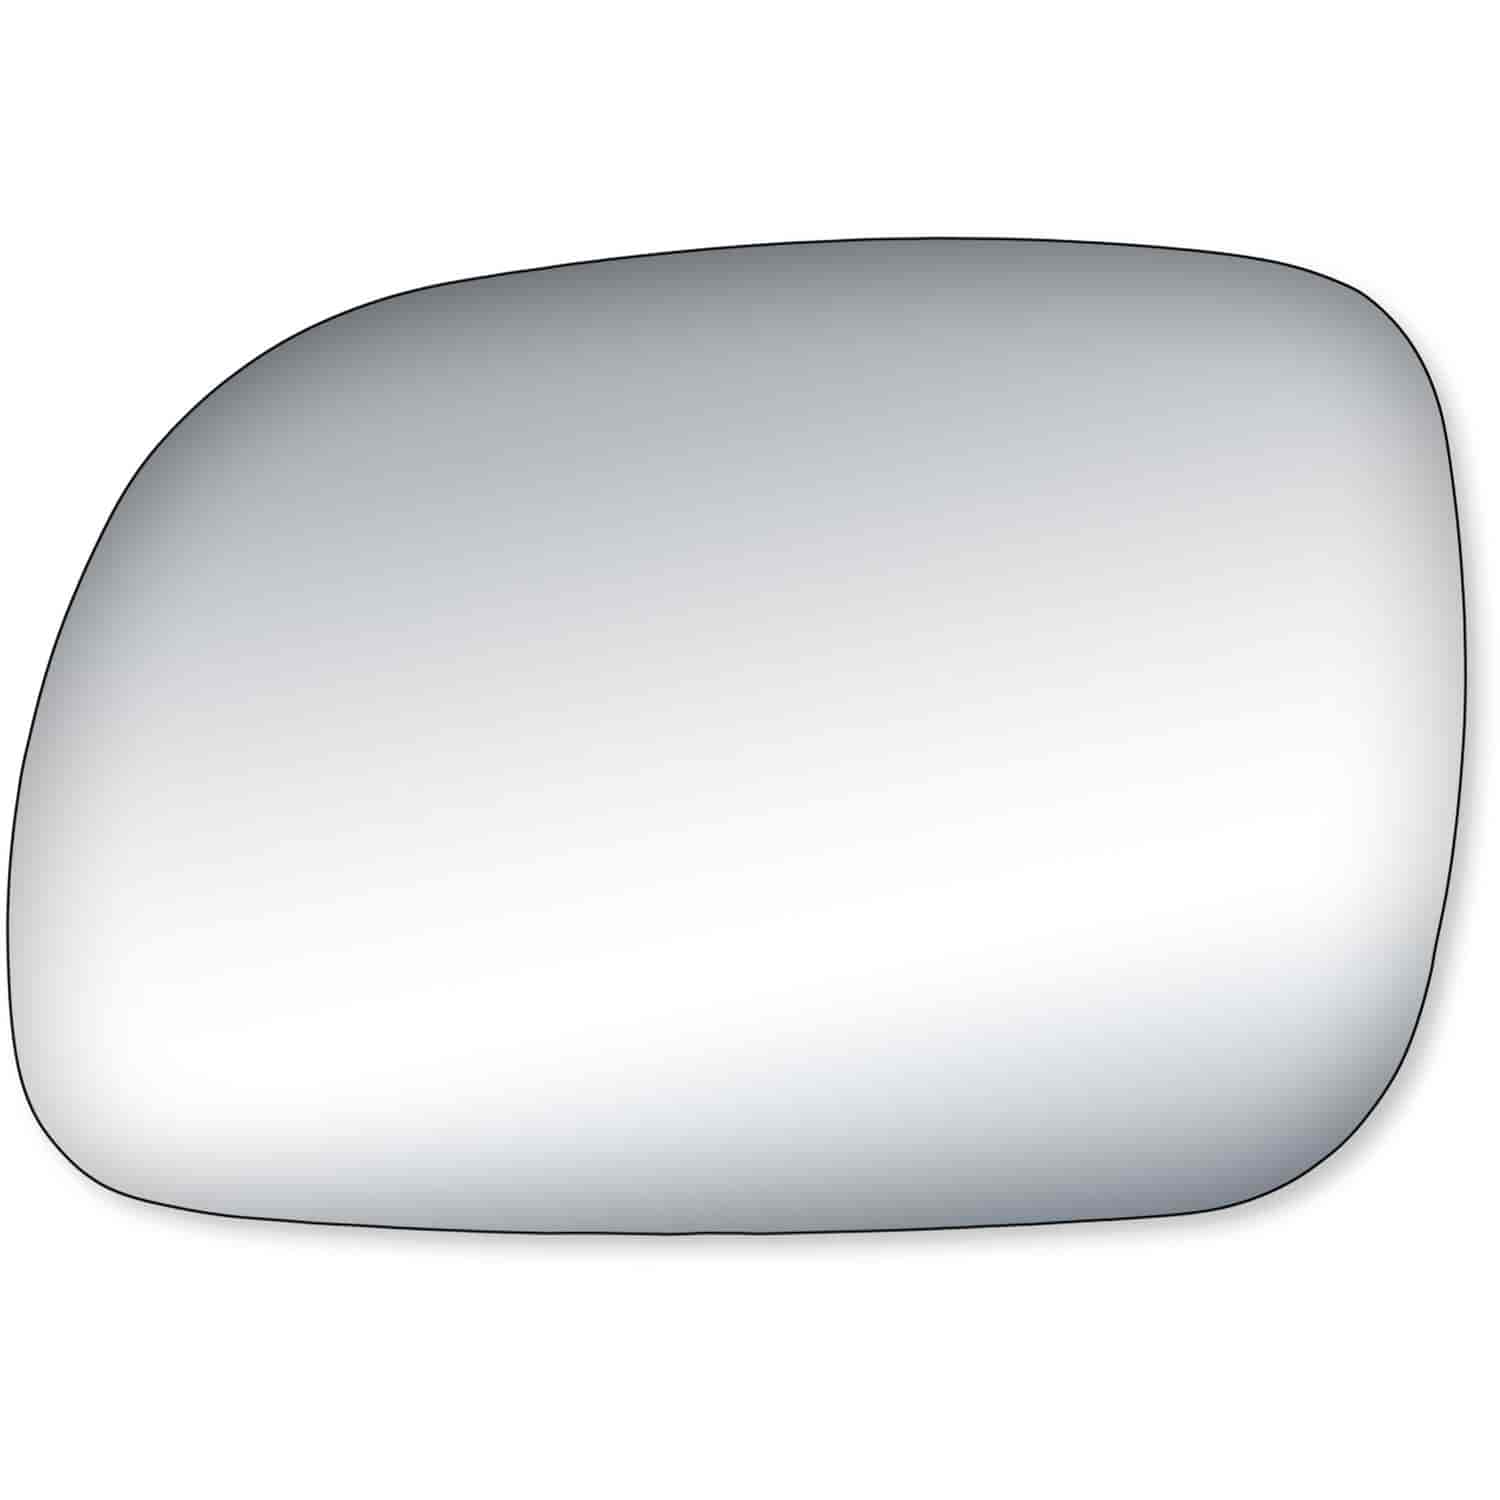 OE Replacement Mirror Glass Fits 1996-2007 Chrysler Town